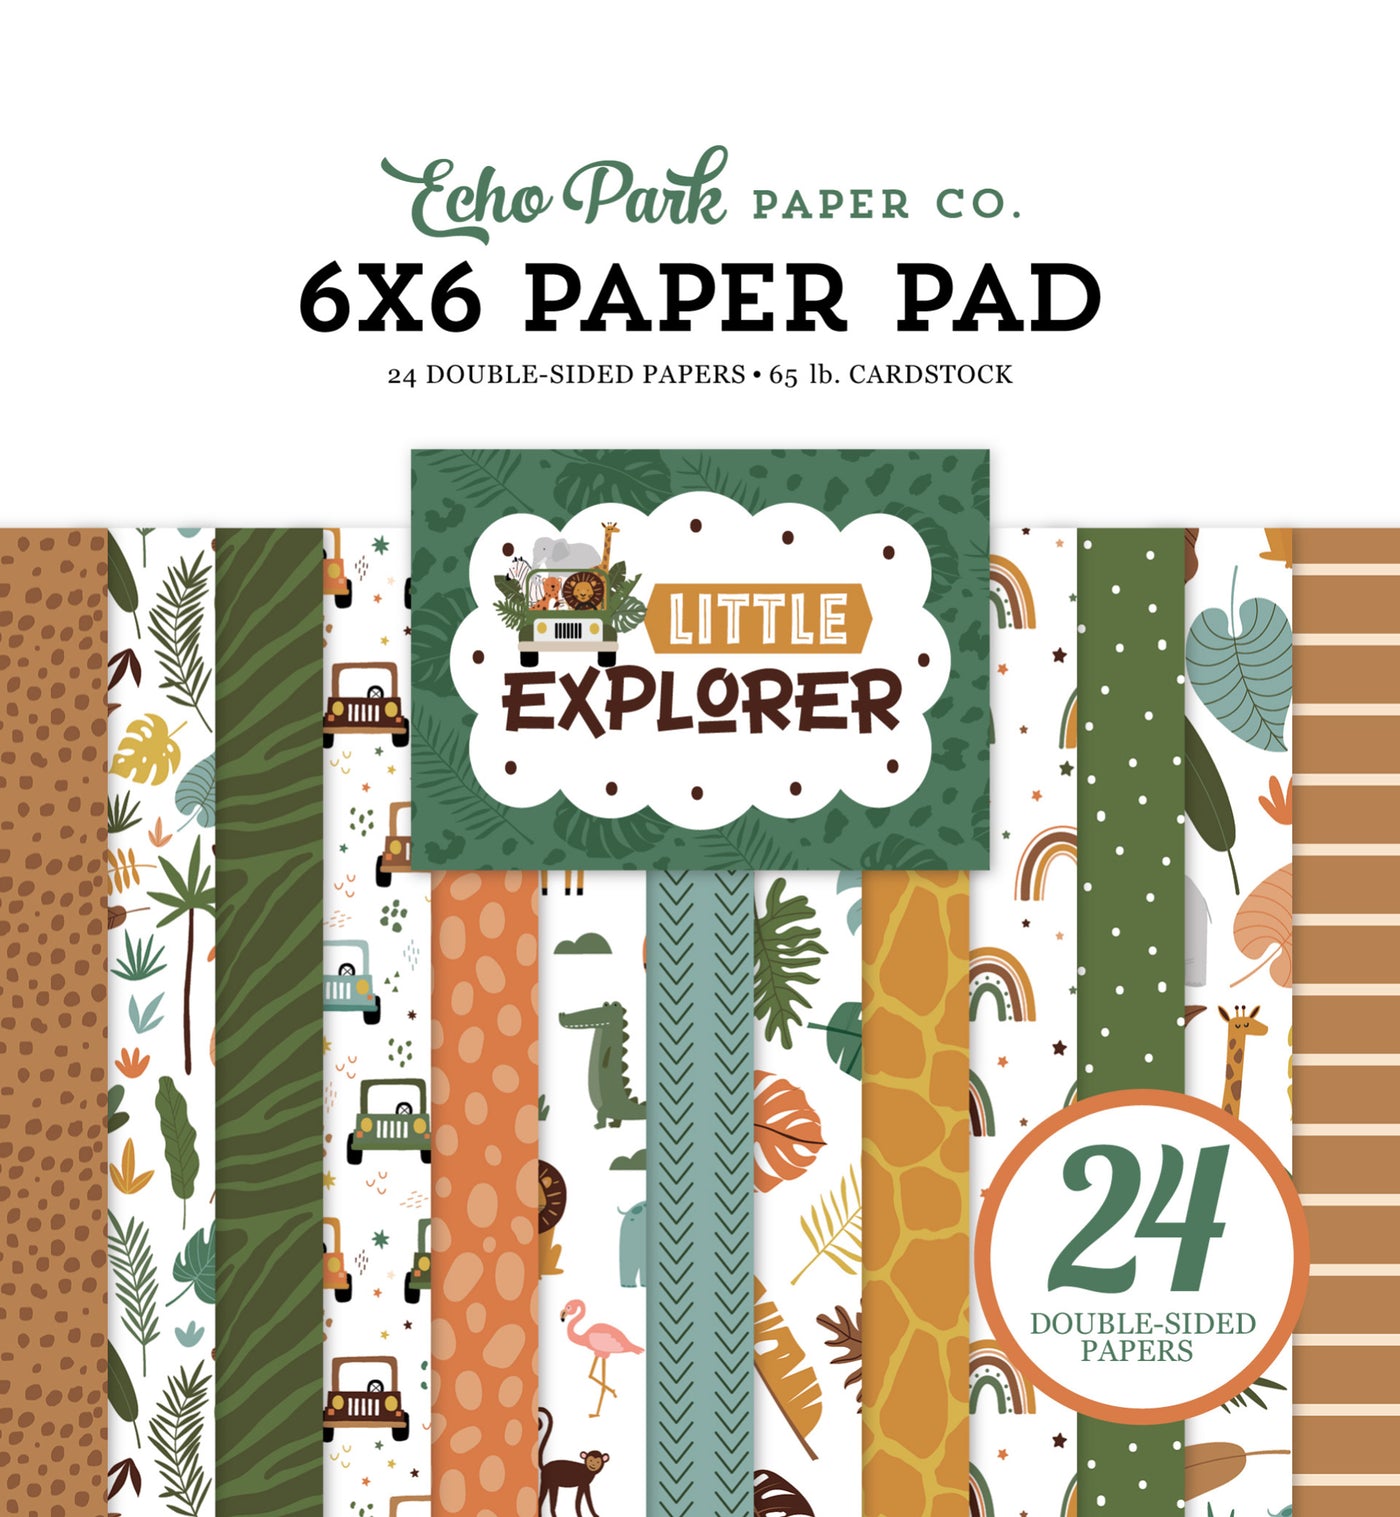 Imagined and real places, friendly zoo animals, and more help you tell stories of adventure. 6x6 pad with 24 double-sided pages for versatile paper crafting. By Echo Park Paper Co.